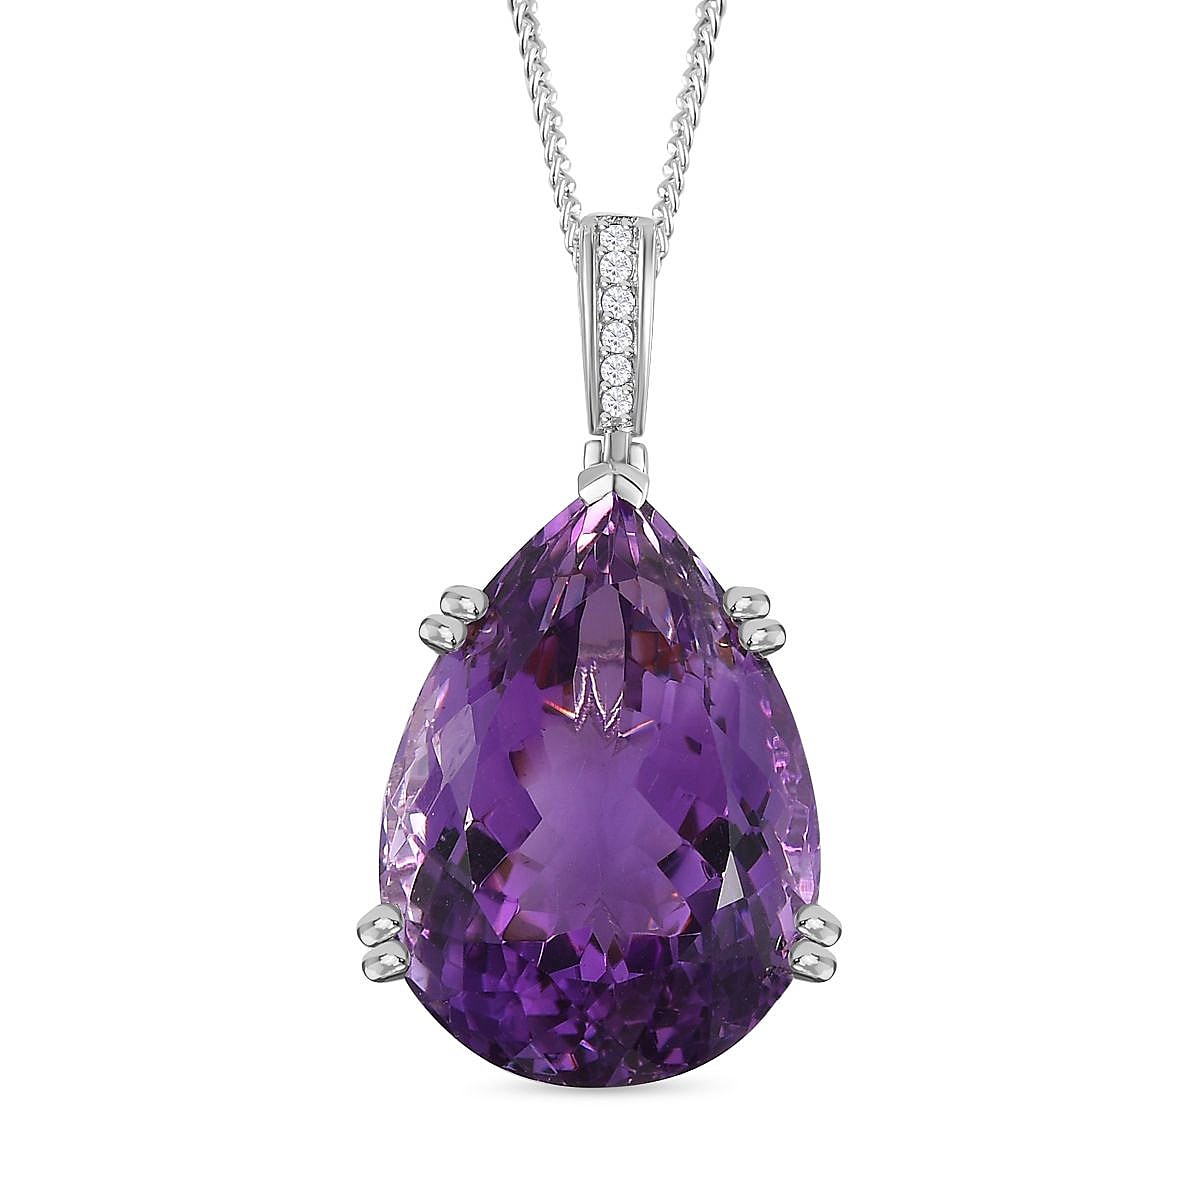 Canela Amethyst & Natural Zircon Pendant with Chain (Size 20) in Platinum Overlay Sterling Silver 50.10 Ct, Silver Wt. 11.5 Gms